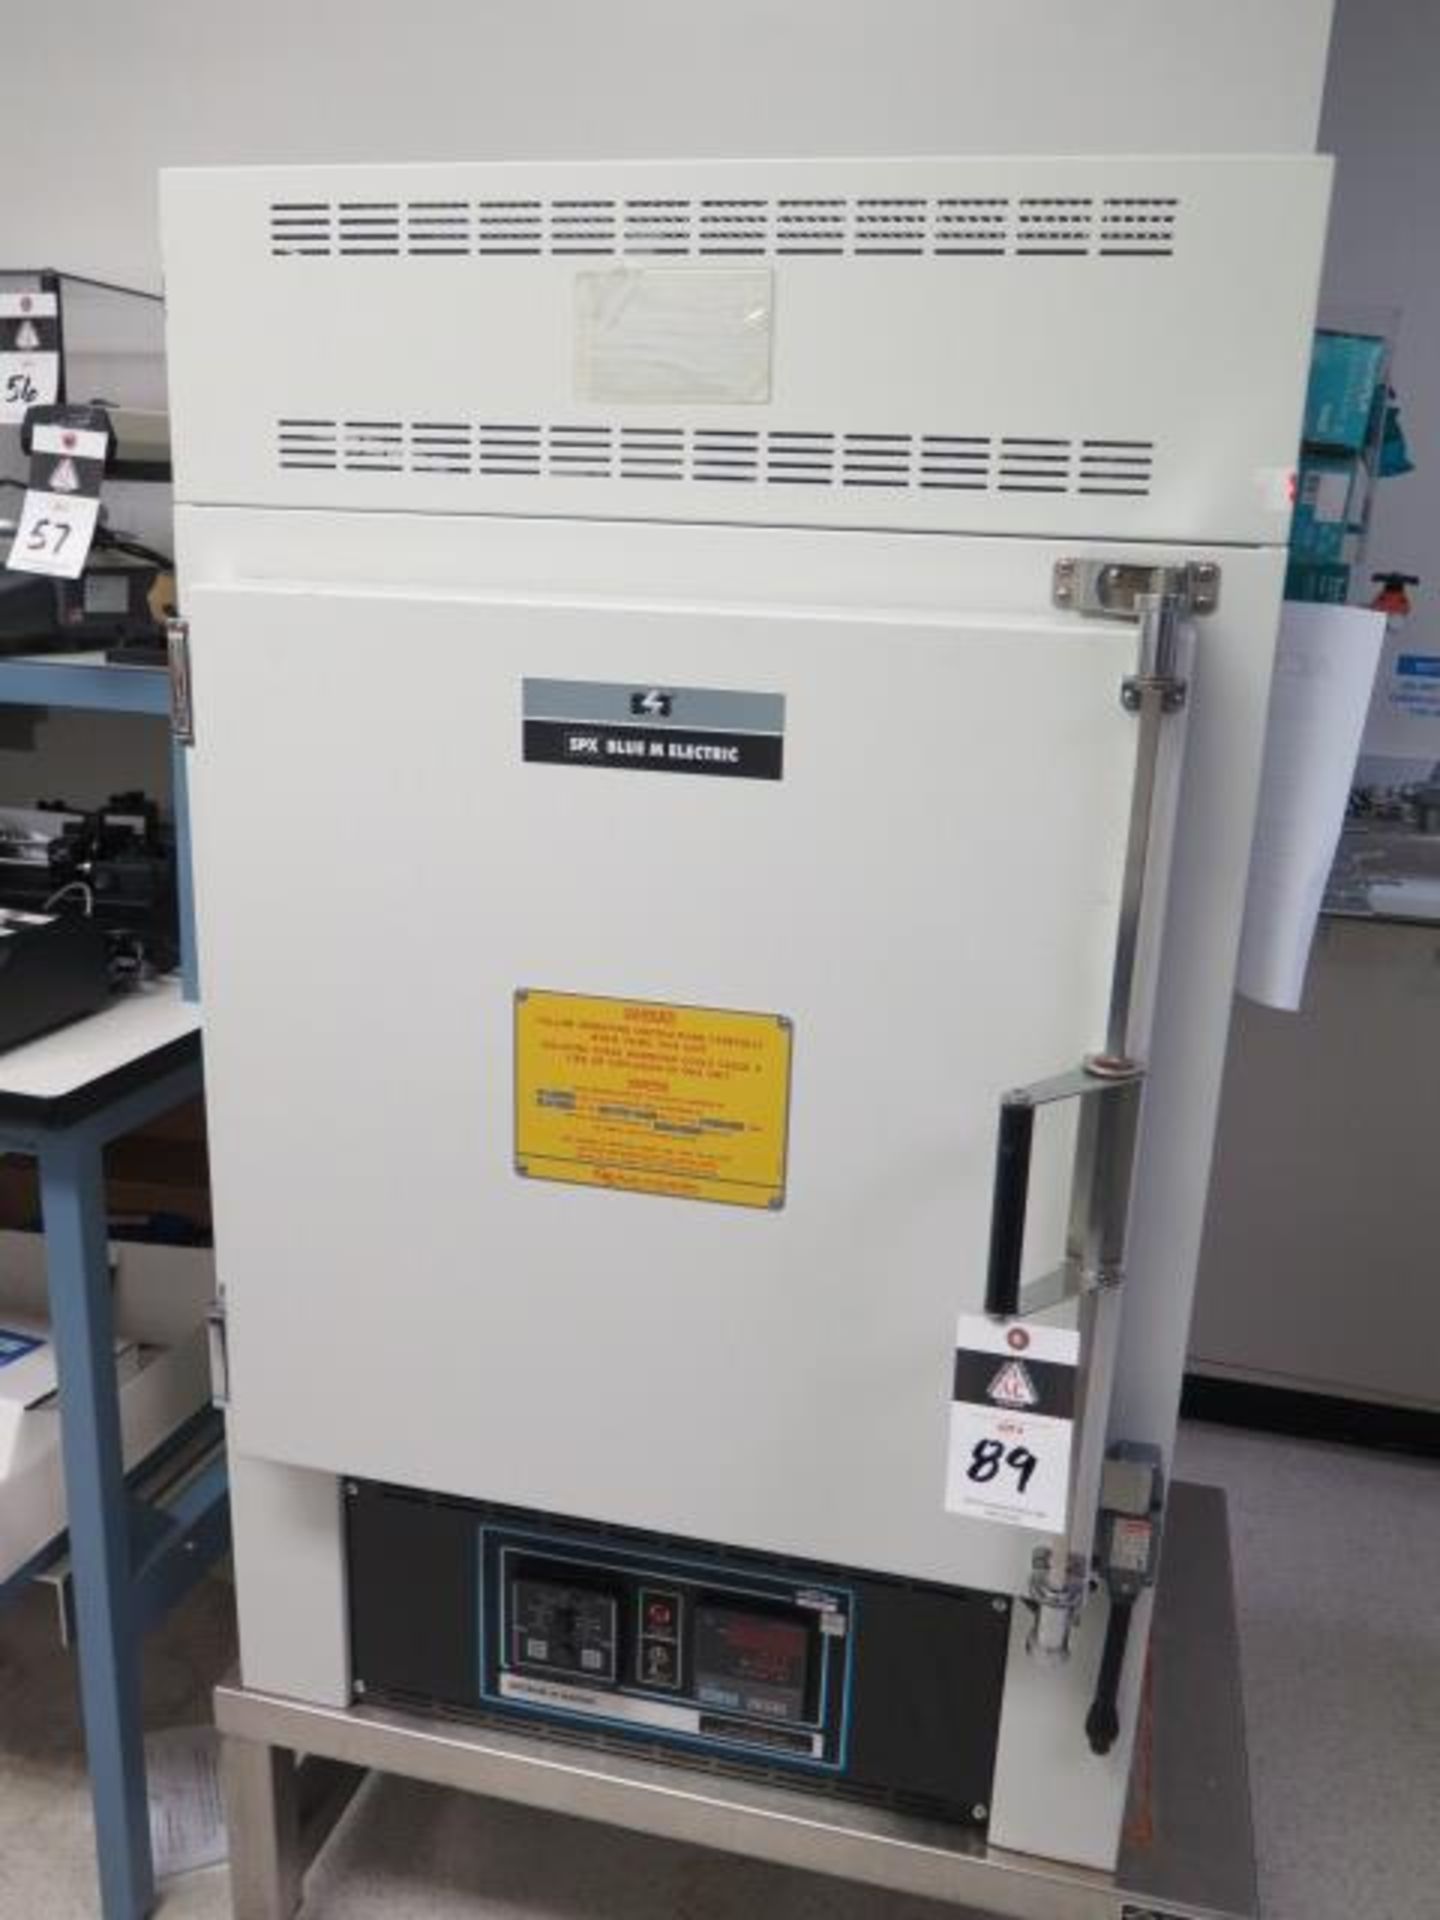 SPX BlueM CSP-400A-B-ST350 Electric Lab Oven s/n 30539 w/ Controls, To 343 Deg C, 5.3kW, SOLD AS IS